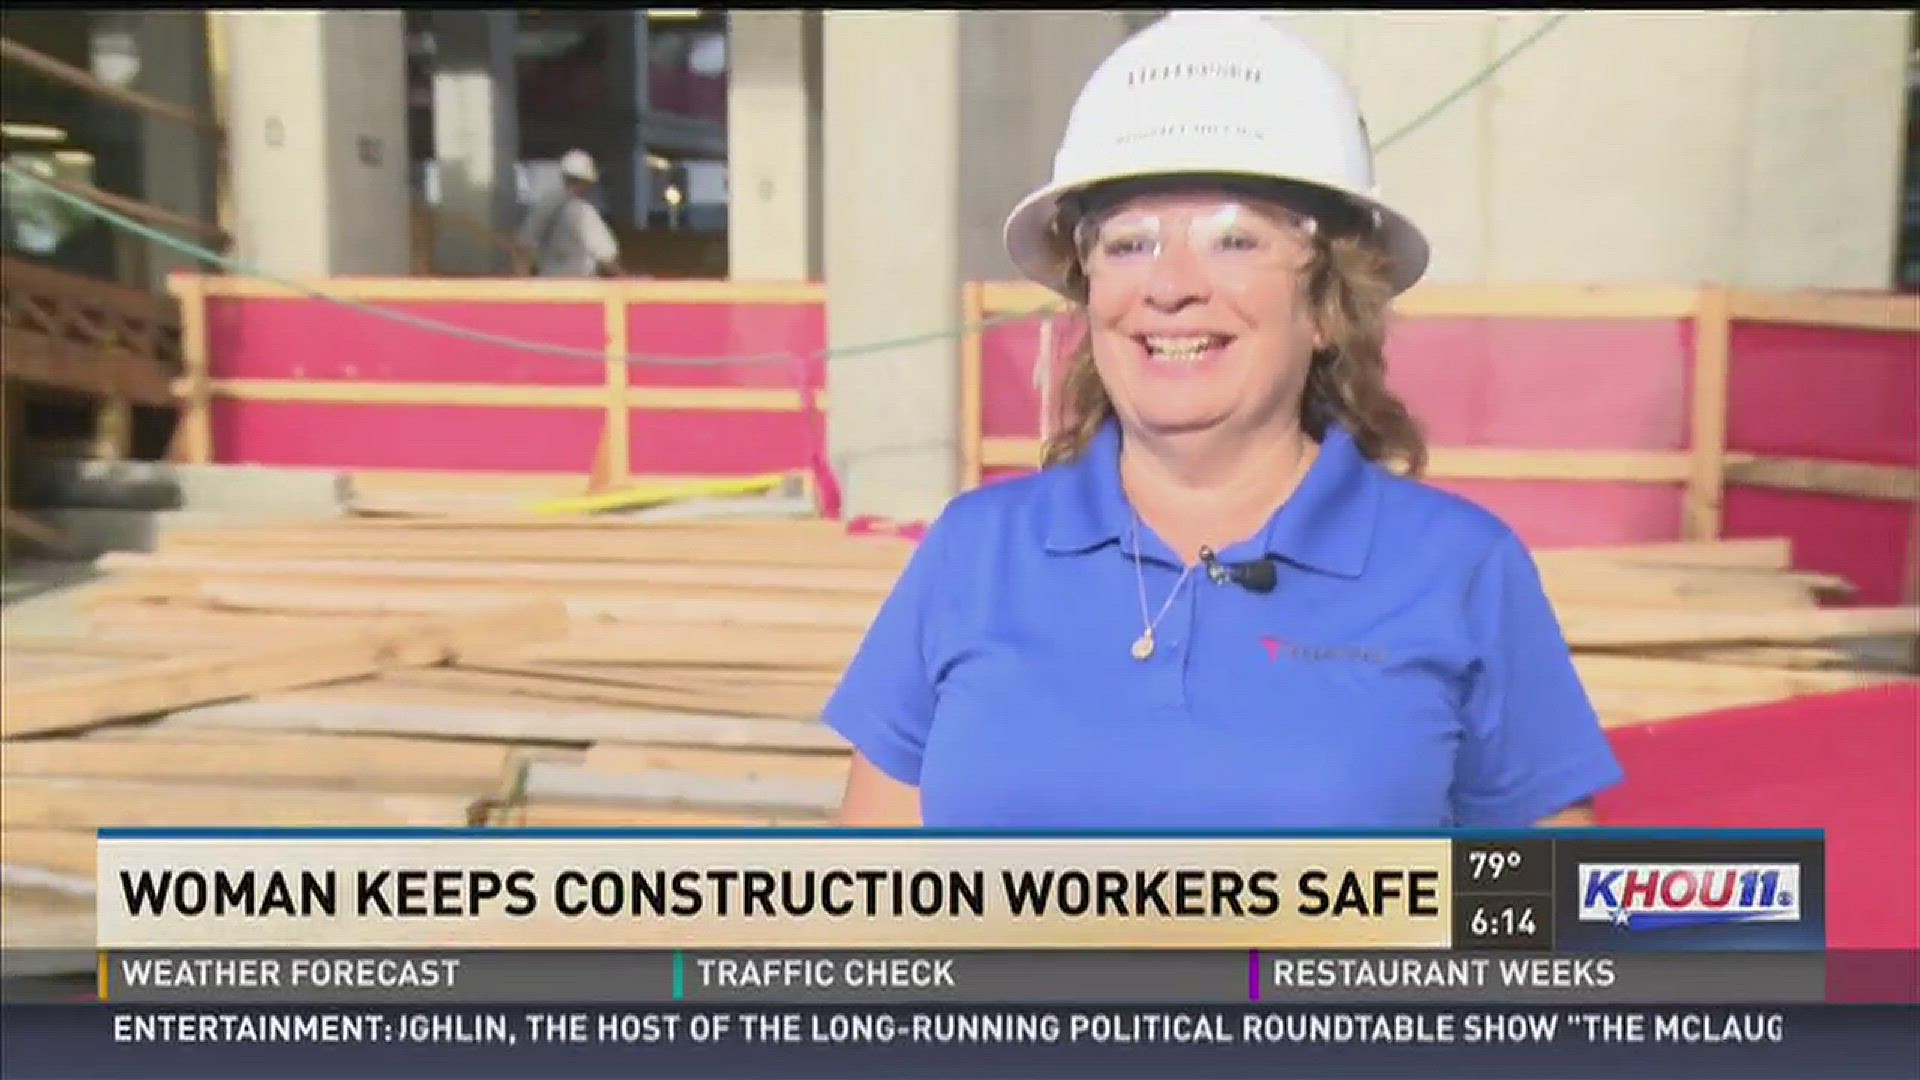 They say safety is no accident. Tellepsen is considered one of the safest construction companies in the country. It hasn't had a major accident on a job site for more than a decade. Susan Phillips in the safety guru with the stellar record.